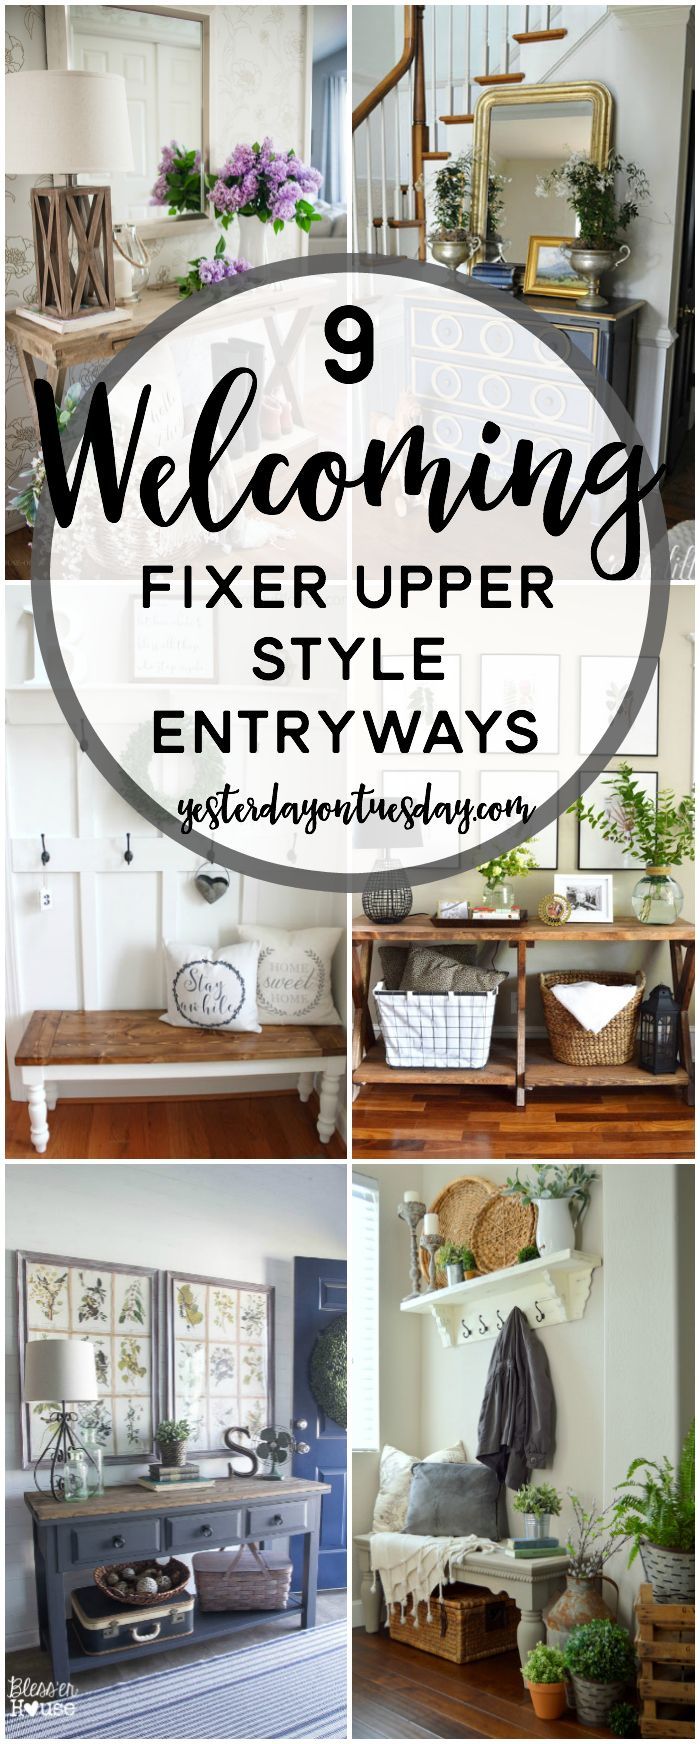 9 Cozy Fixer Upper Style Entryways -   23 country style fixer upper
 ideas